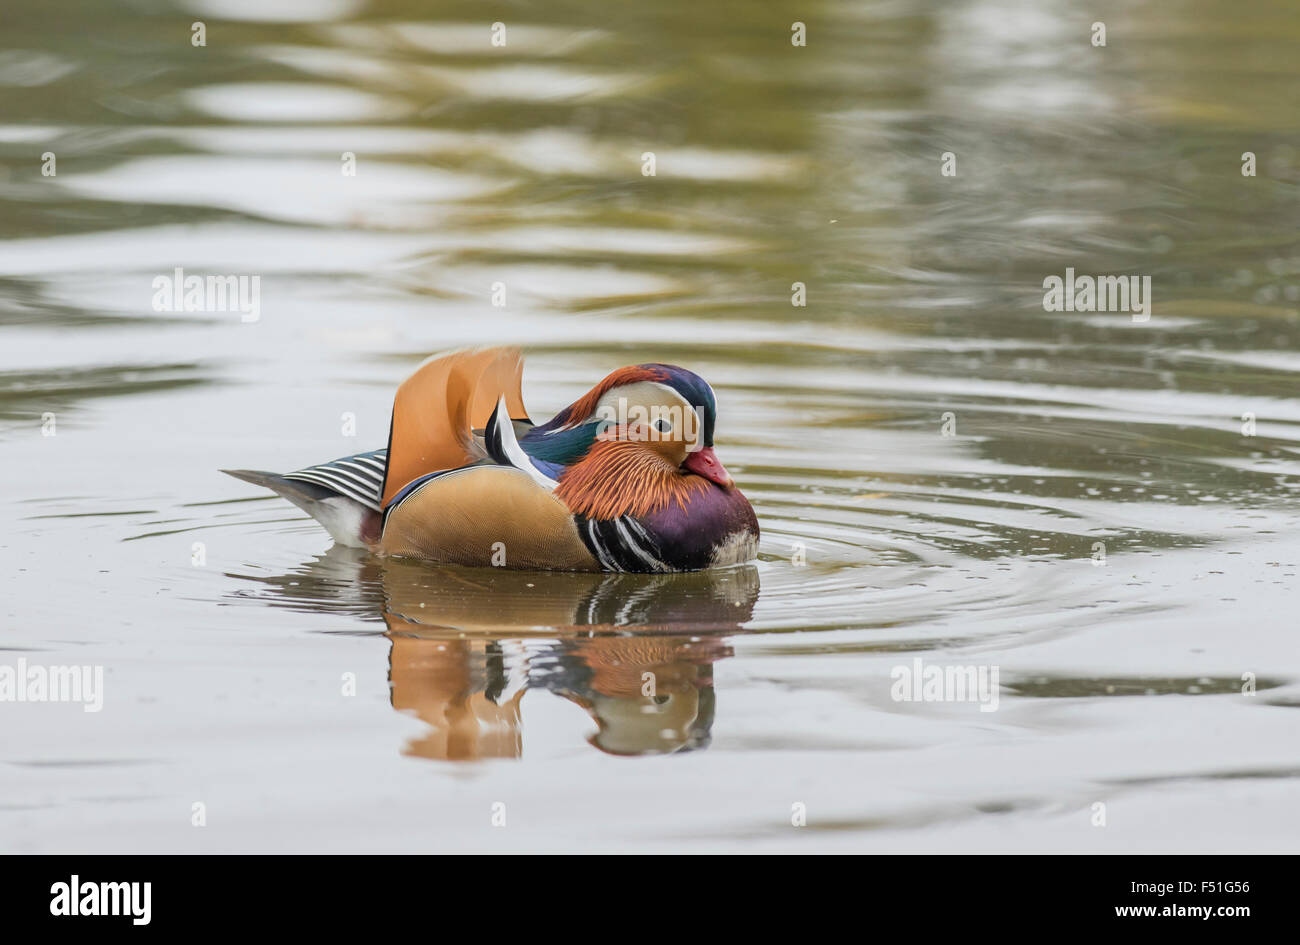 Mandarin duck (Aix galericulata) male (drake). The species is native to Asia, but breeds ferally in parts of Britain and Europe. Stock Photo